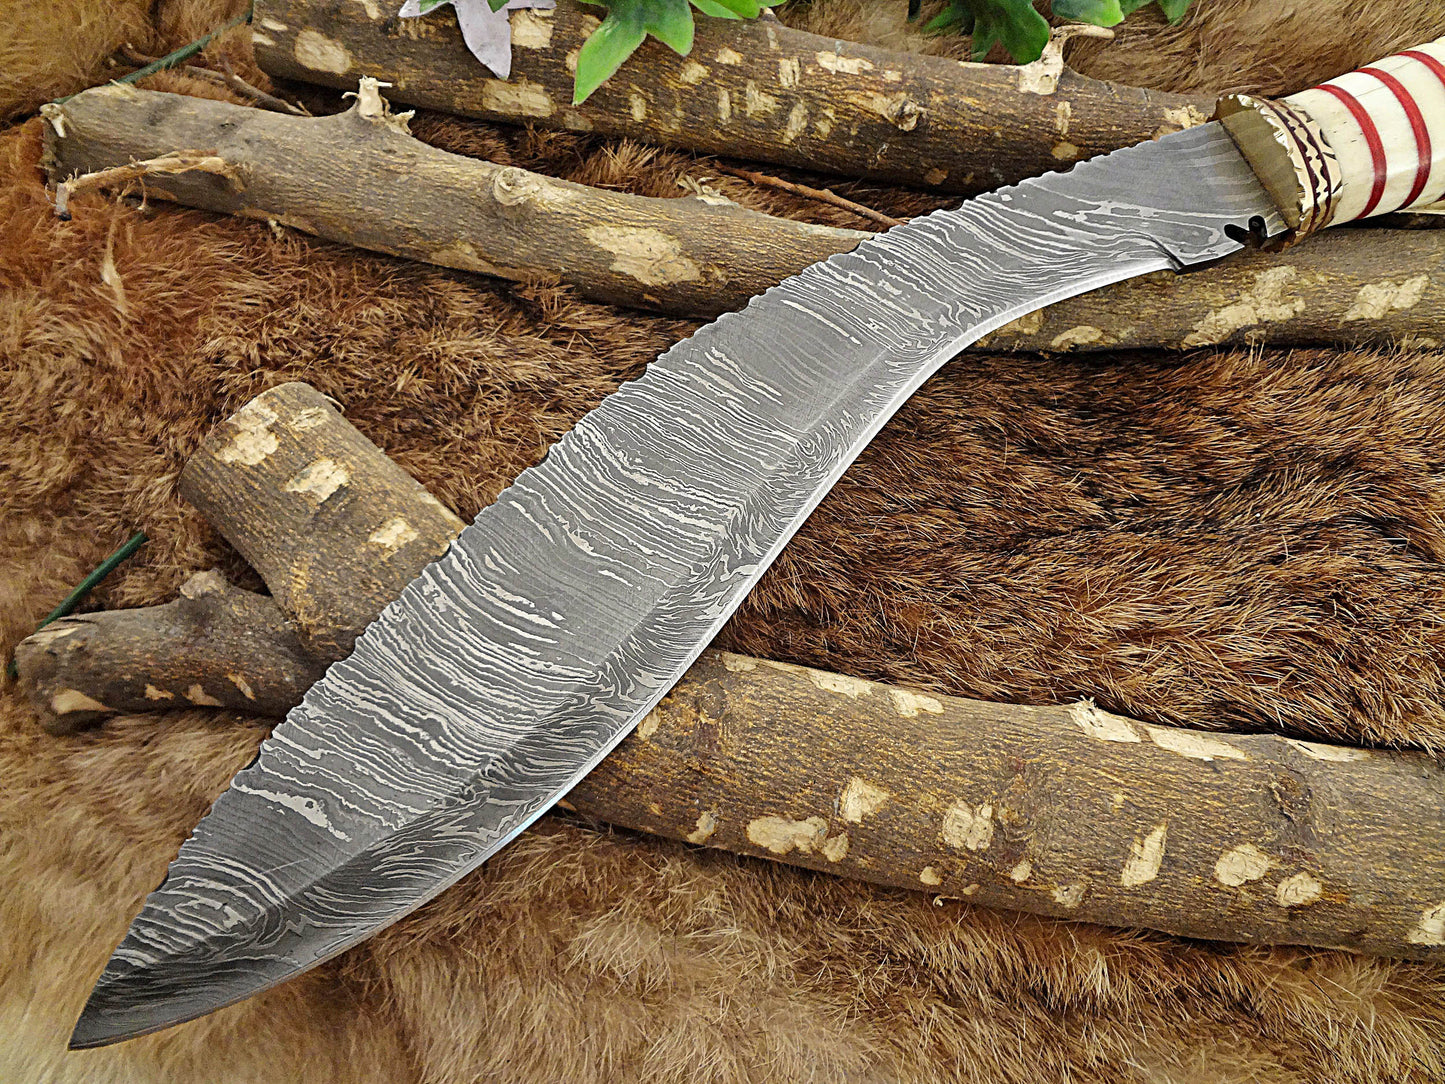 15" custom made Hand Forged Damascus Steel Kukri Knife With 10" blade, camel bone with engraved brass finger guard scale, Leather Sheath